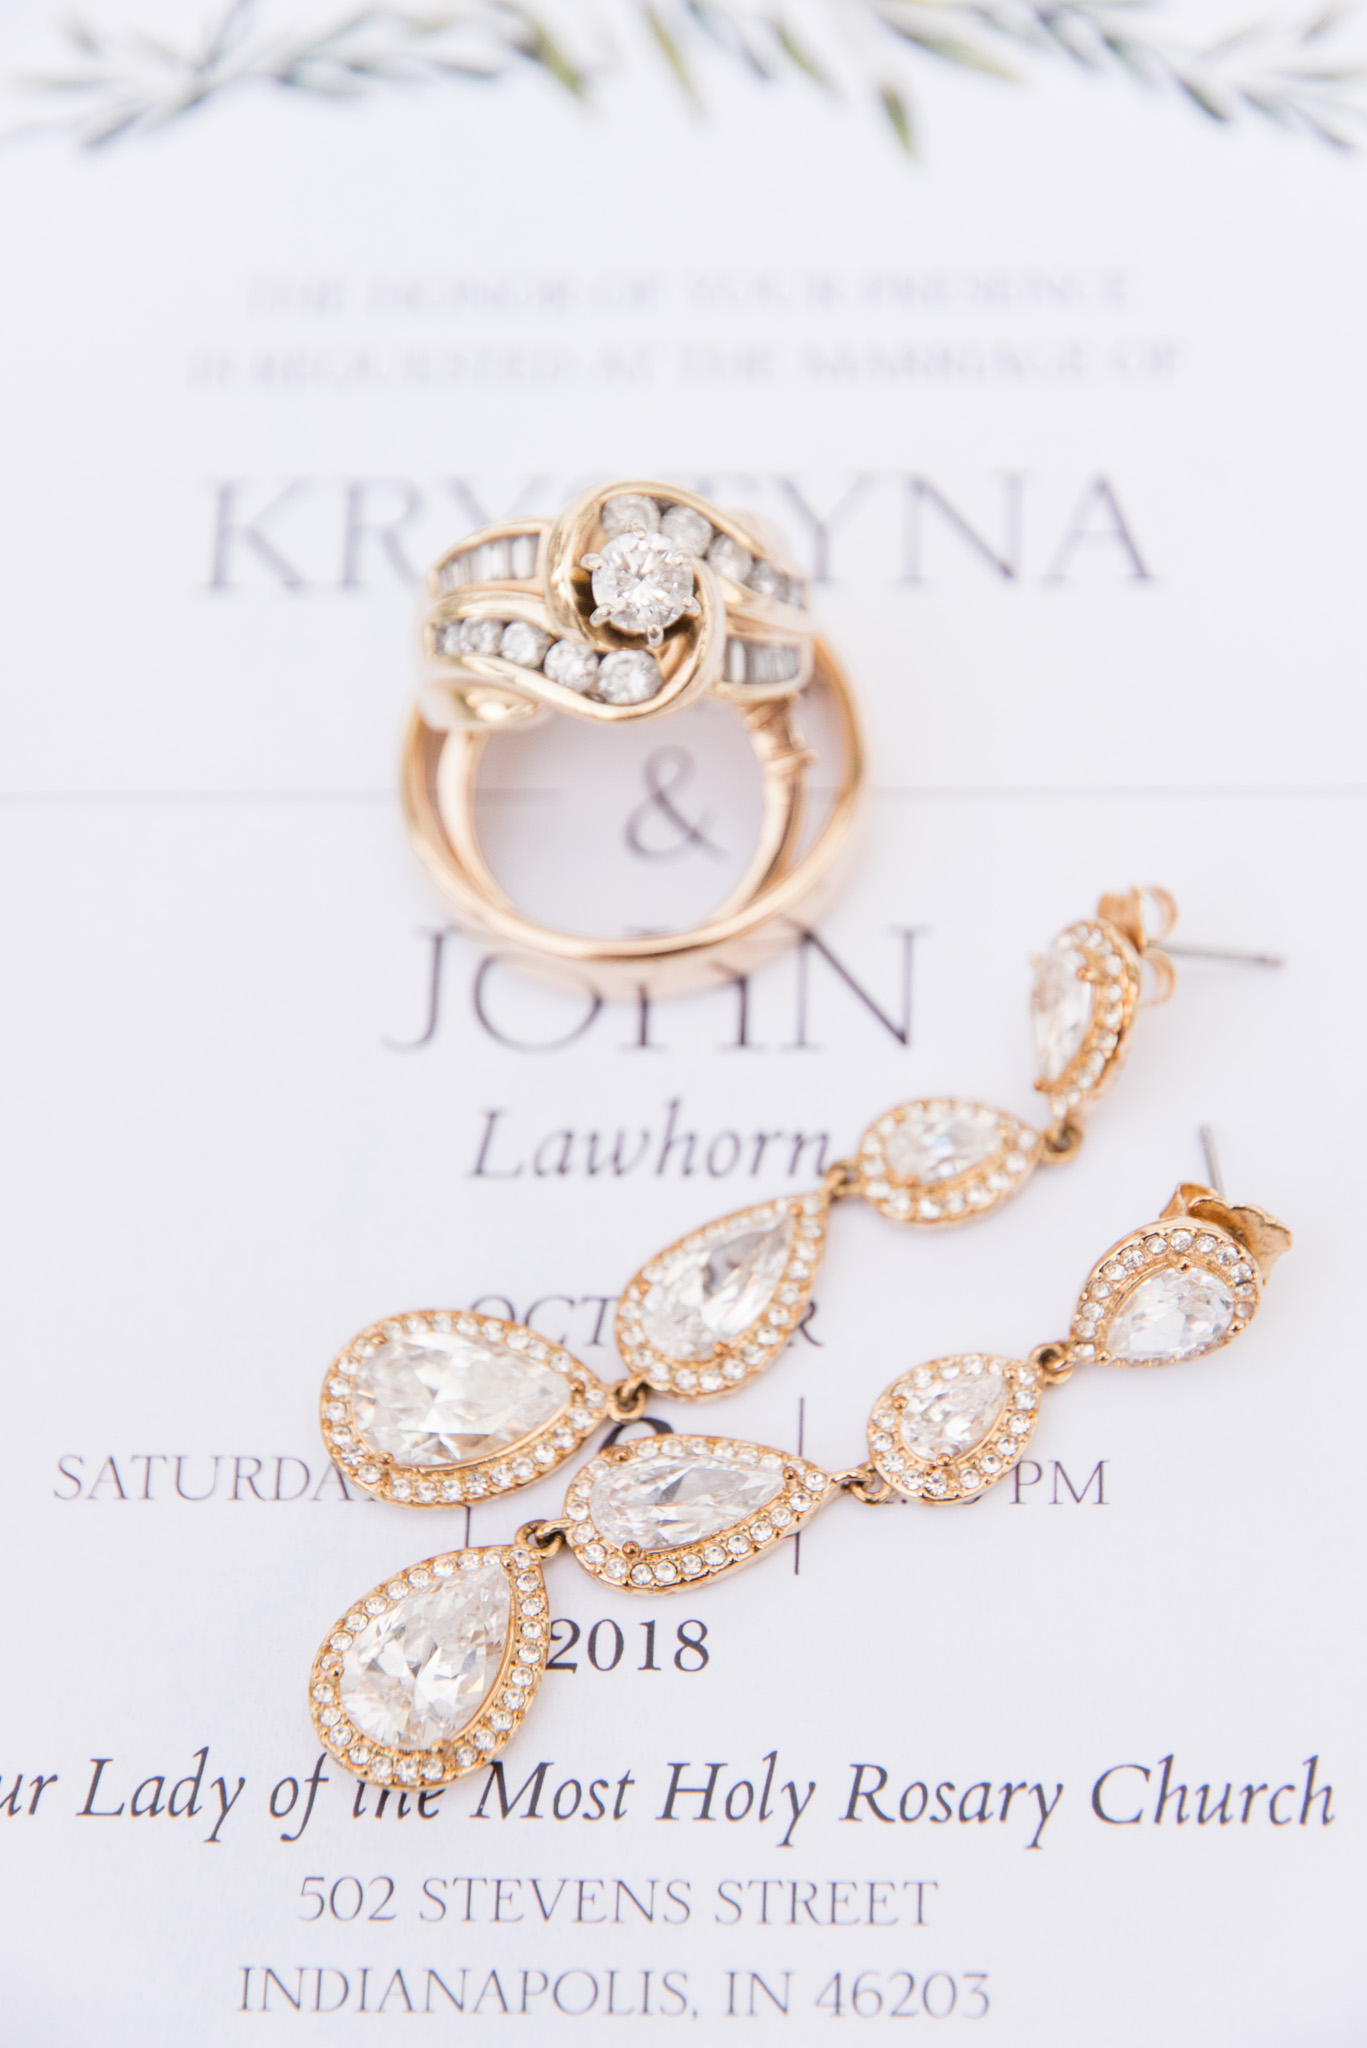 Wedding rings and earrings sit on invitation